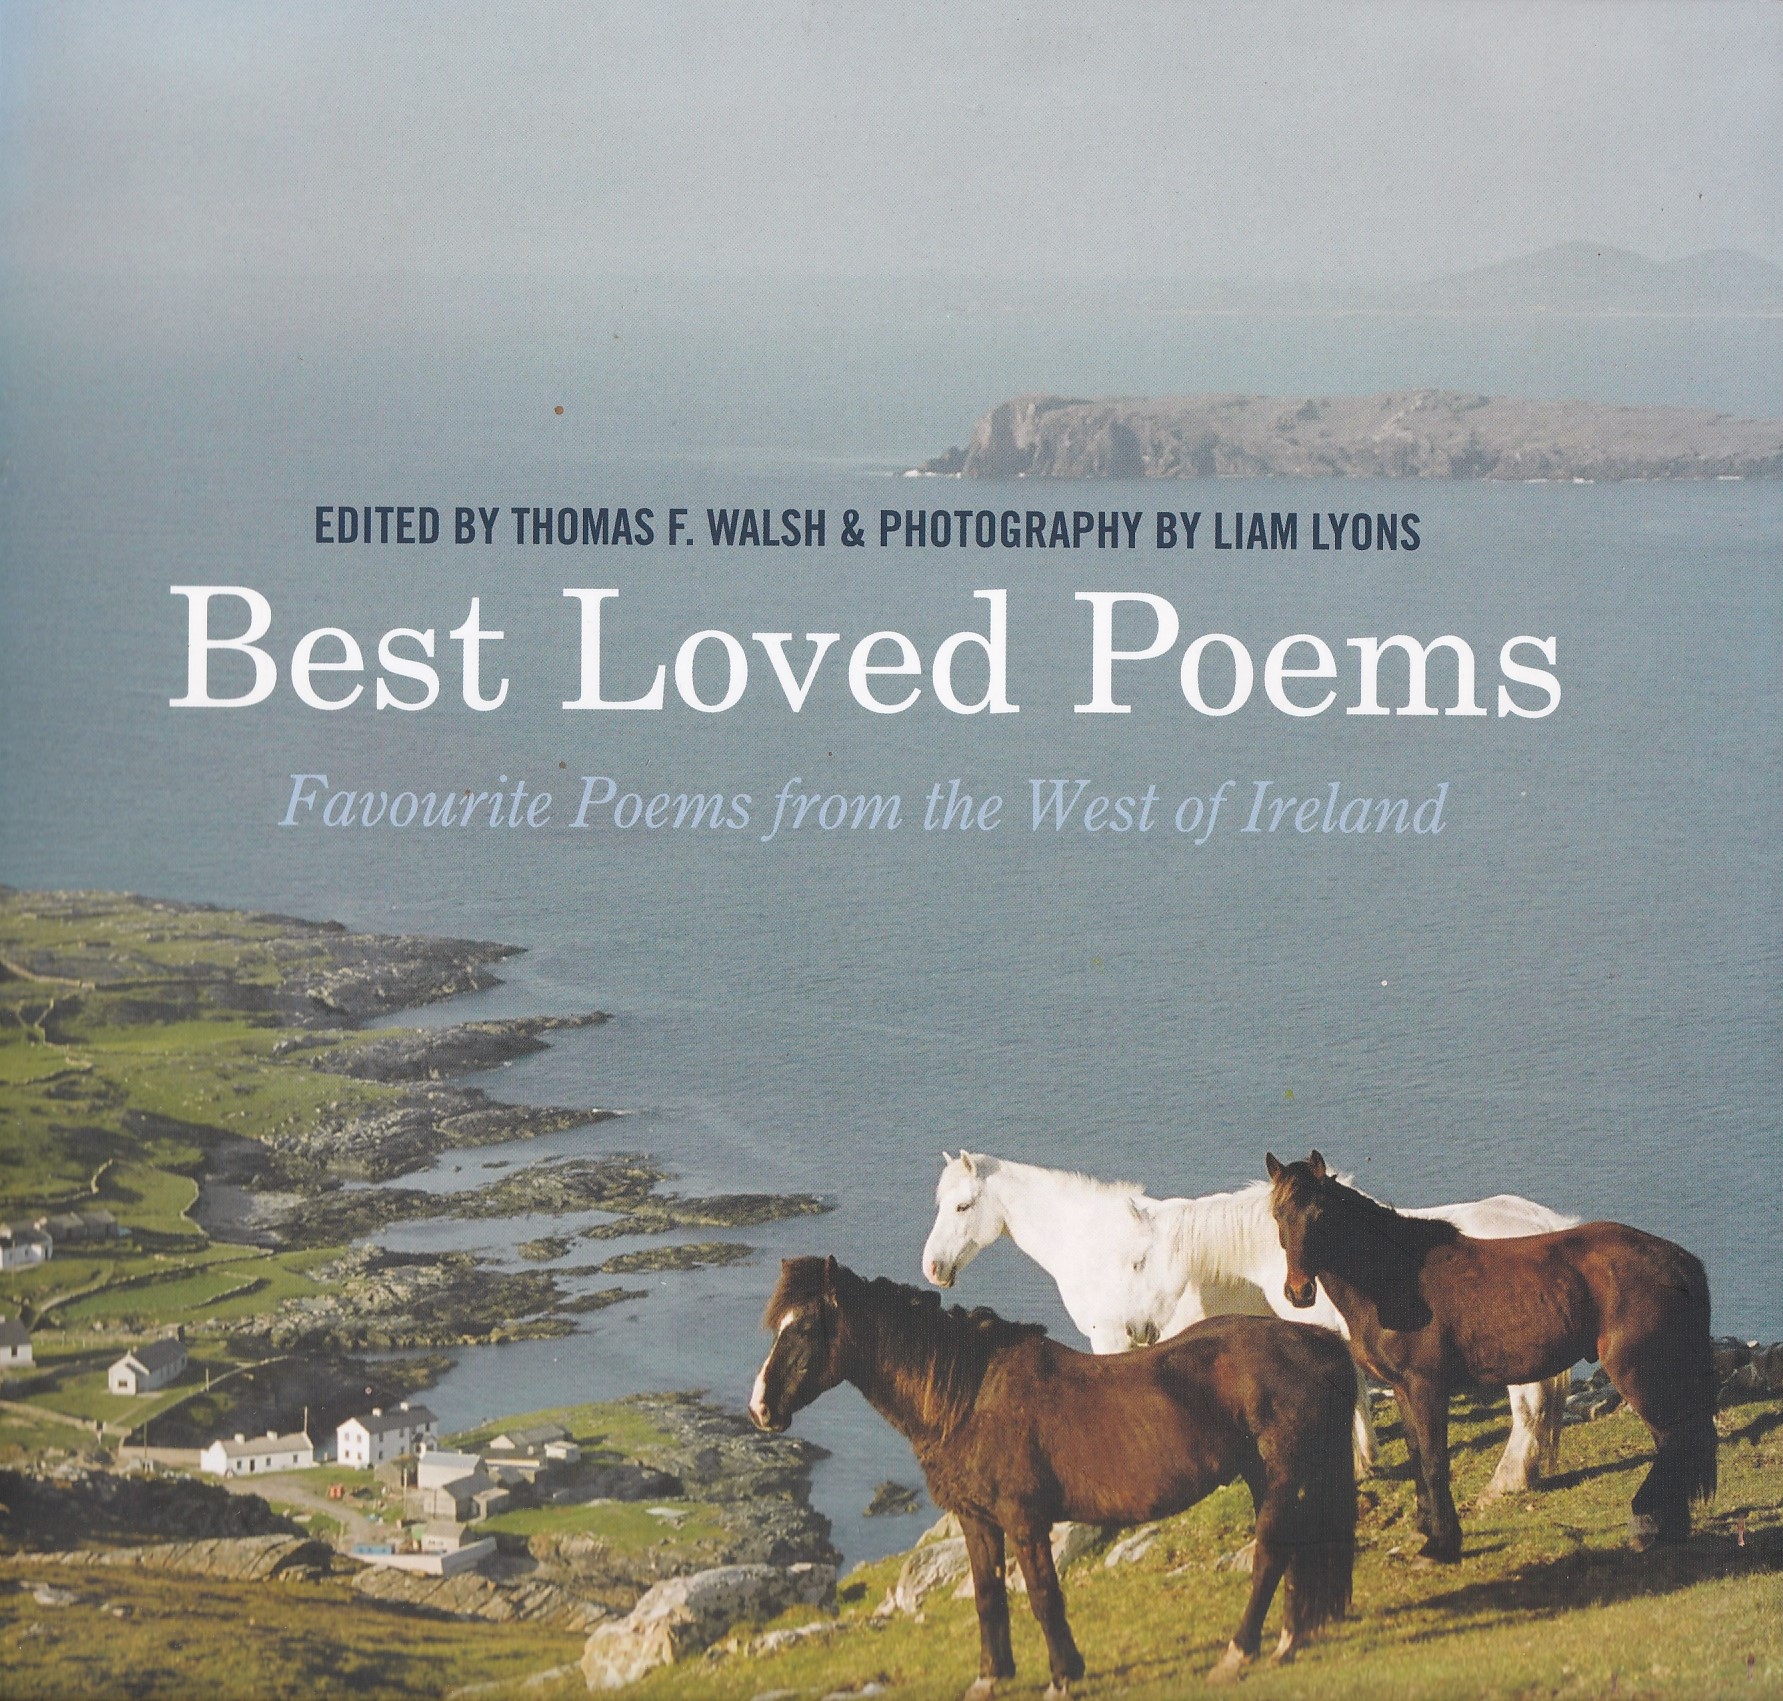 Best Loved Poems: Favorite Poems from the West of Ireland (Signed) | Thomas Walsh & Liam Lyons | Charlie Byrne's